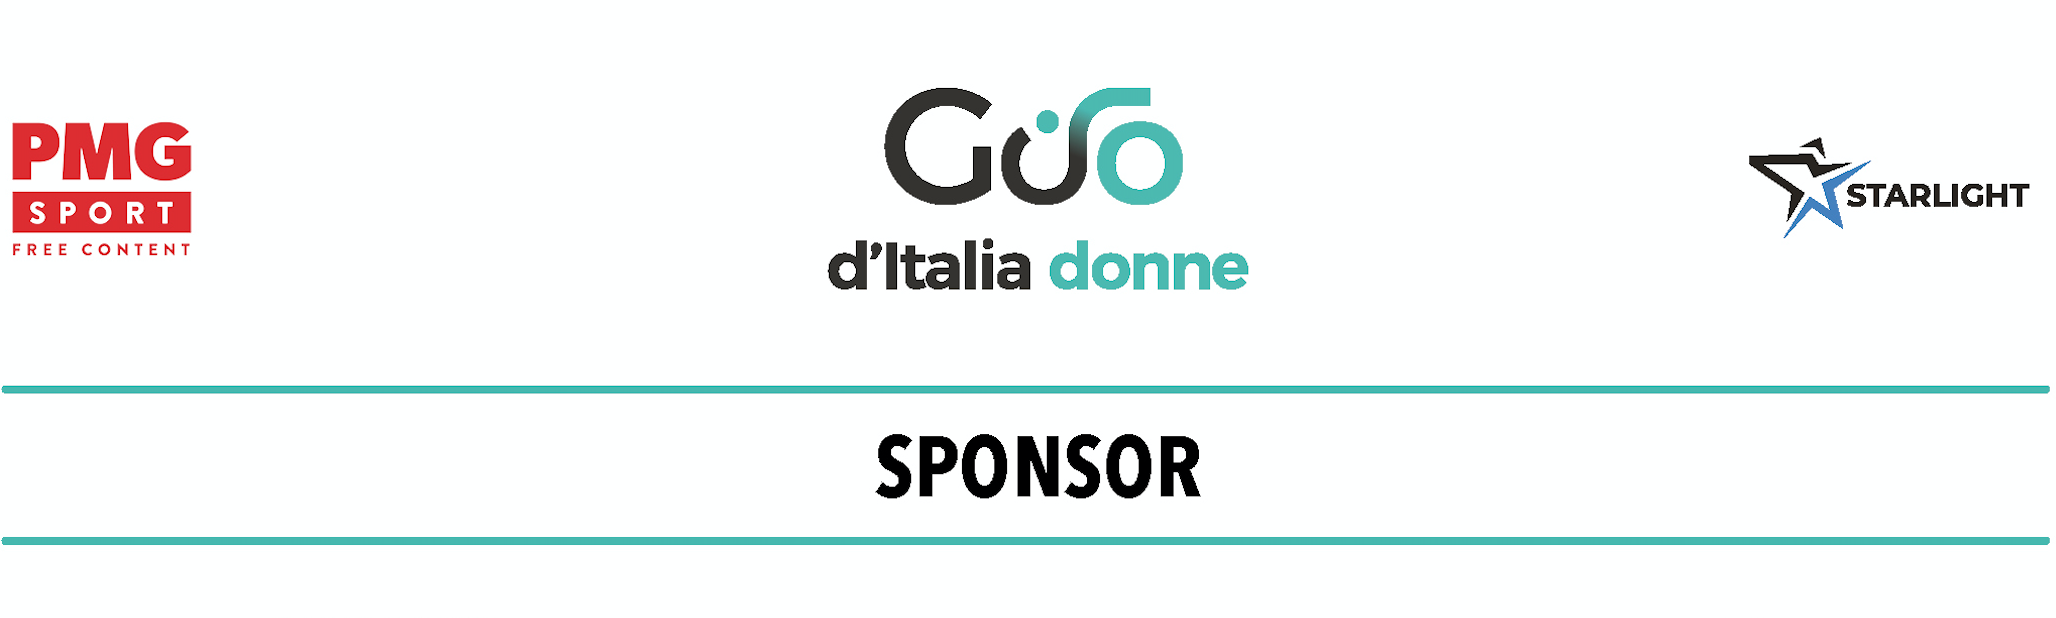 https://www.giroditaliadonne.it/2021/06/22/many-sponsors-and-partners-for-an-event-of-great-technical-and-organizational-quality/